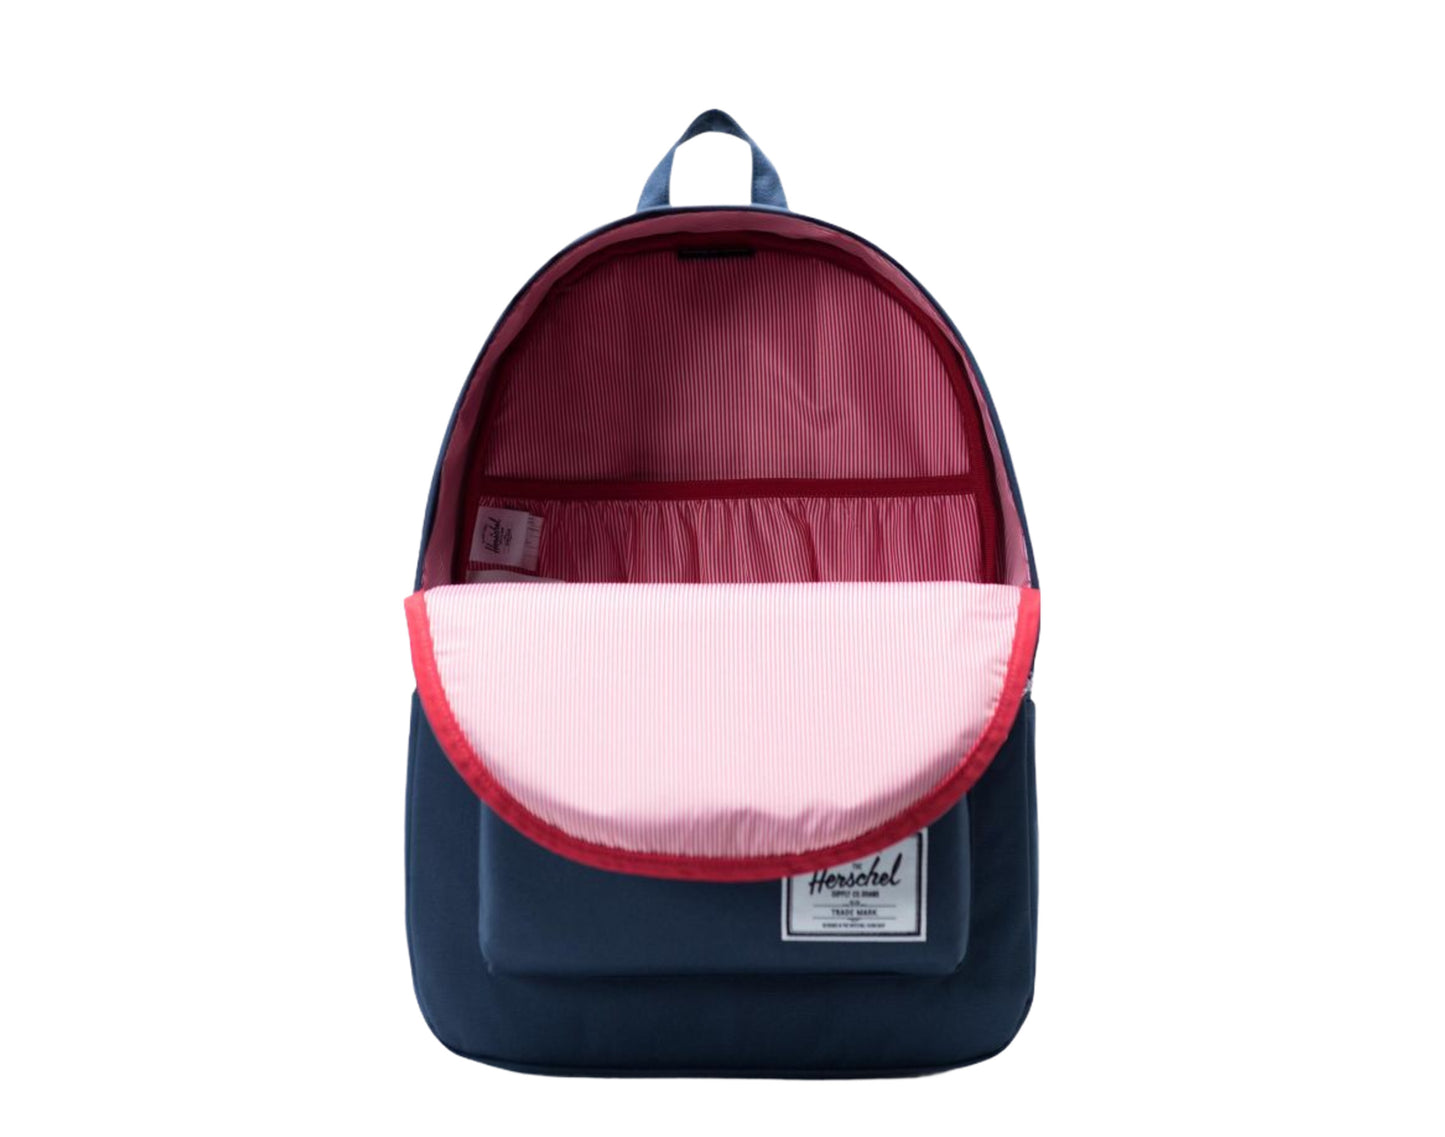 Herschel Supply Co. Classic X-Large Backpack